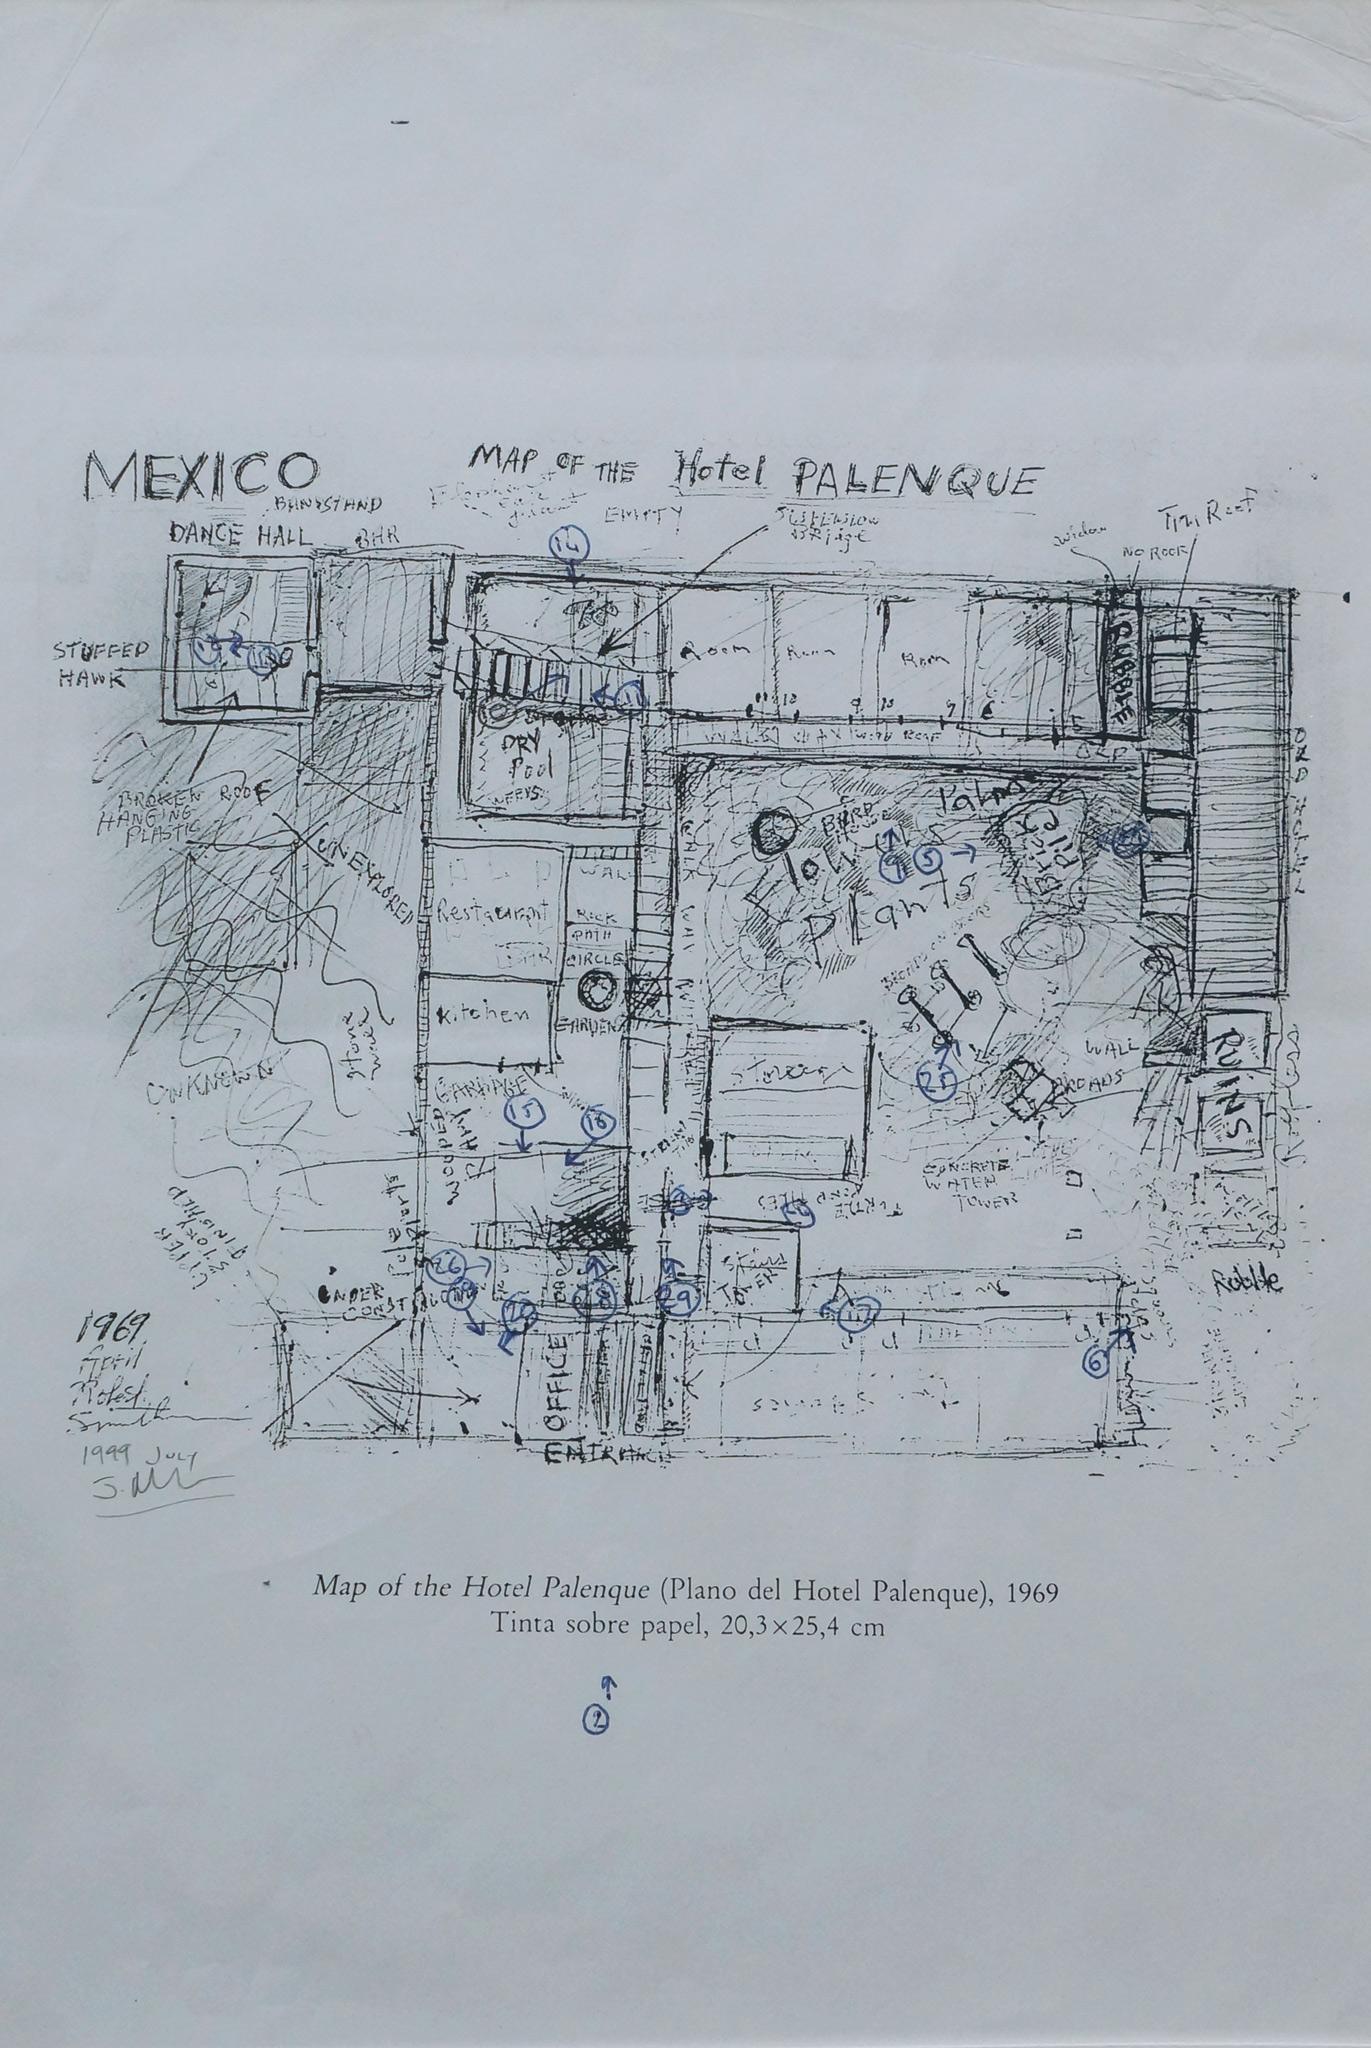 a hand-drawn map on paper of a hotel in palenque mexico